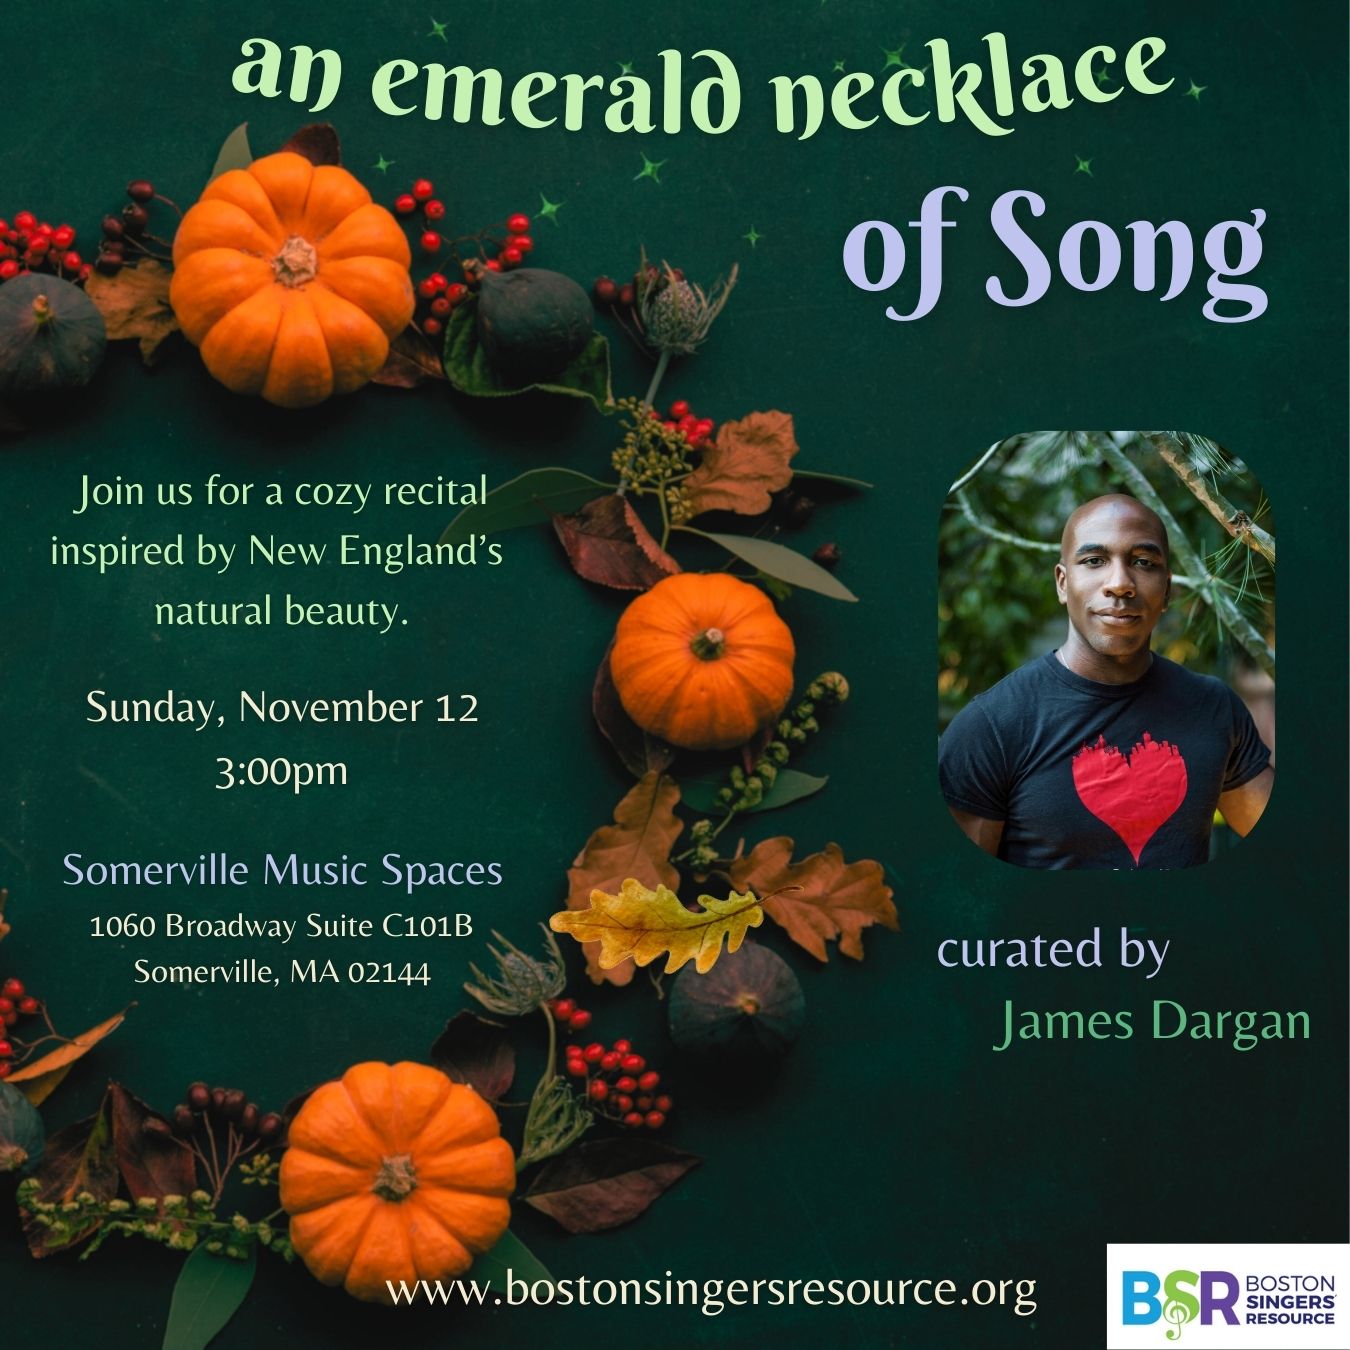 A cozy fall scene, with James Dargan's photo and information about the concert listed